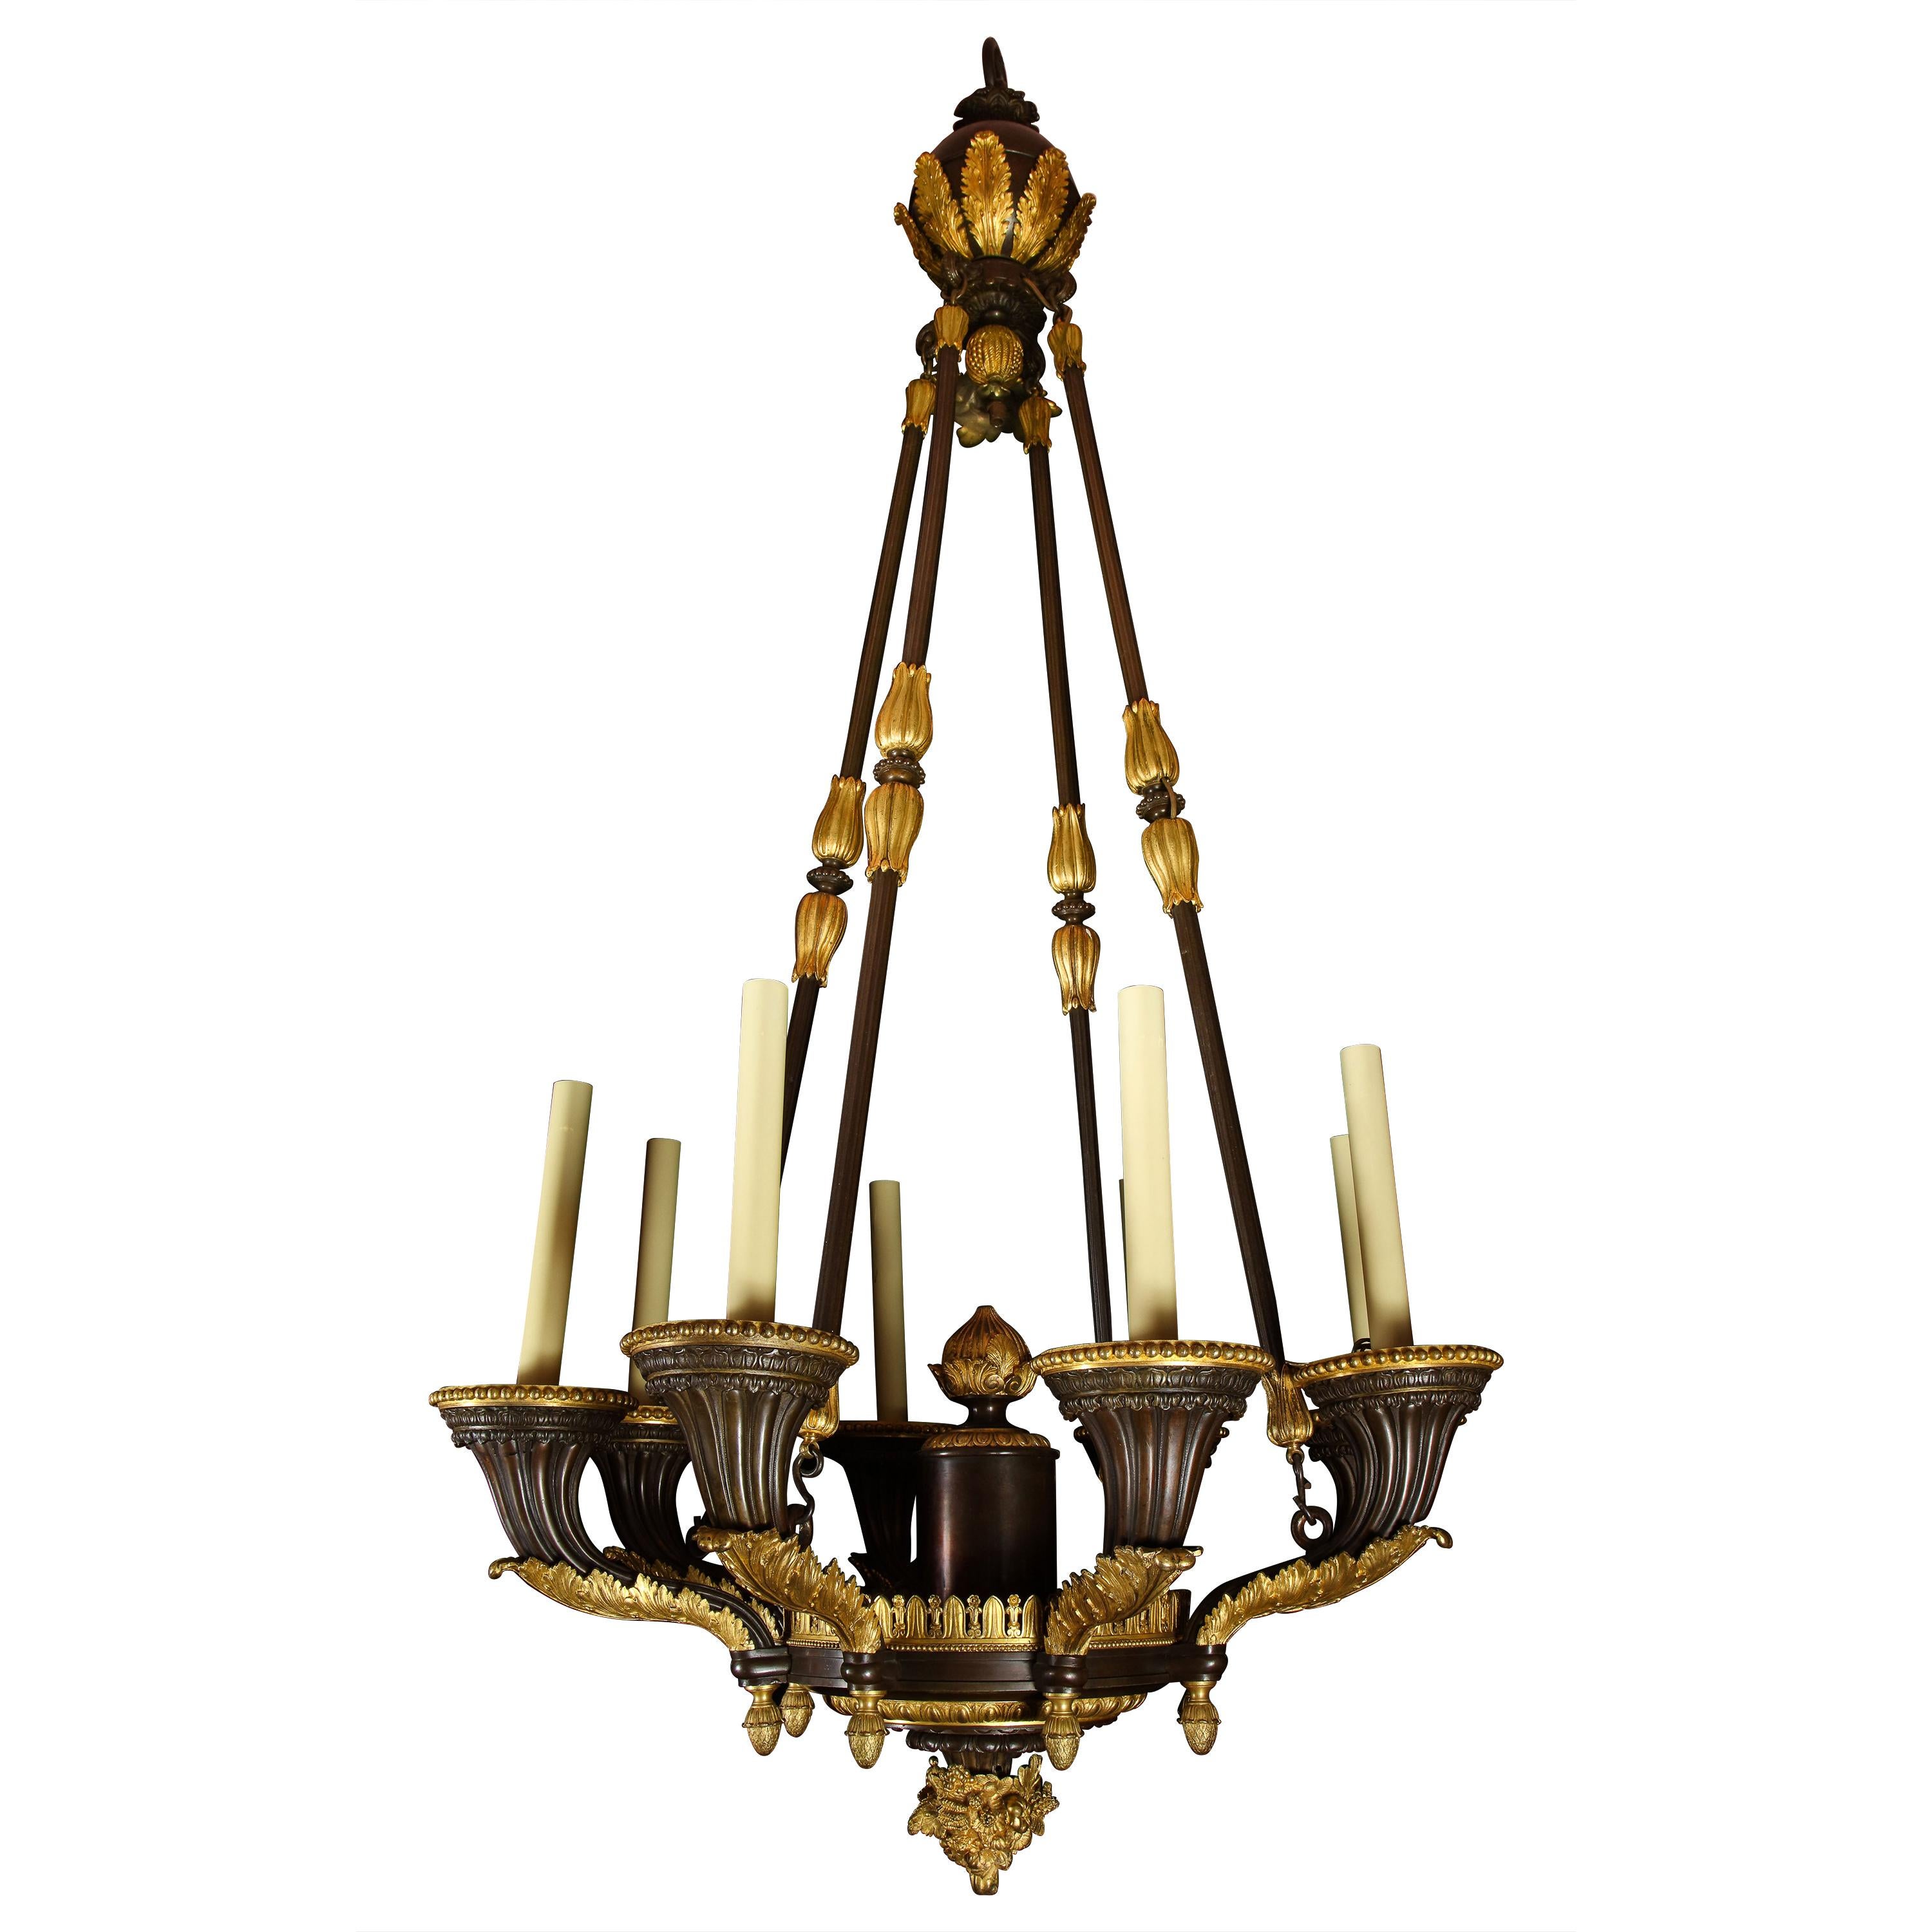 Monumental Unique Antique French Empire Gilt and Patinated Bronze Chandelier